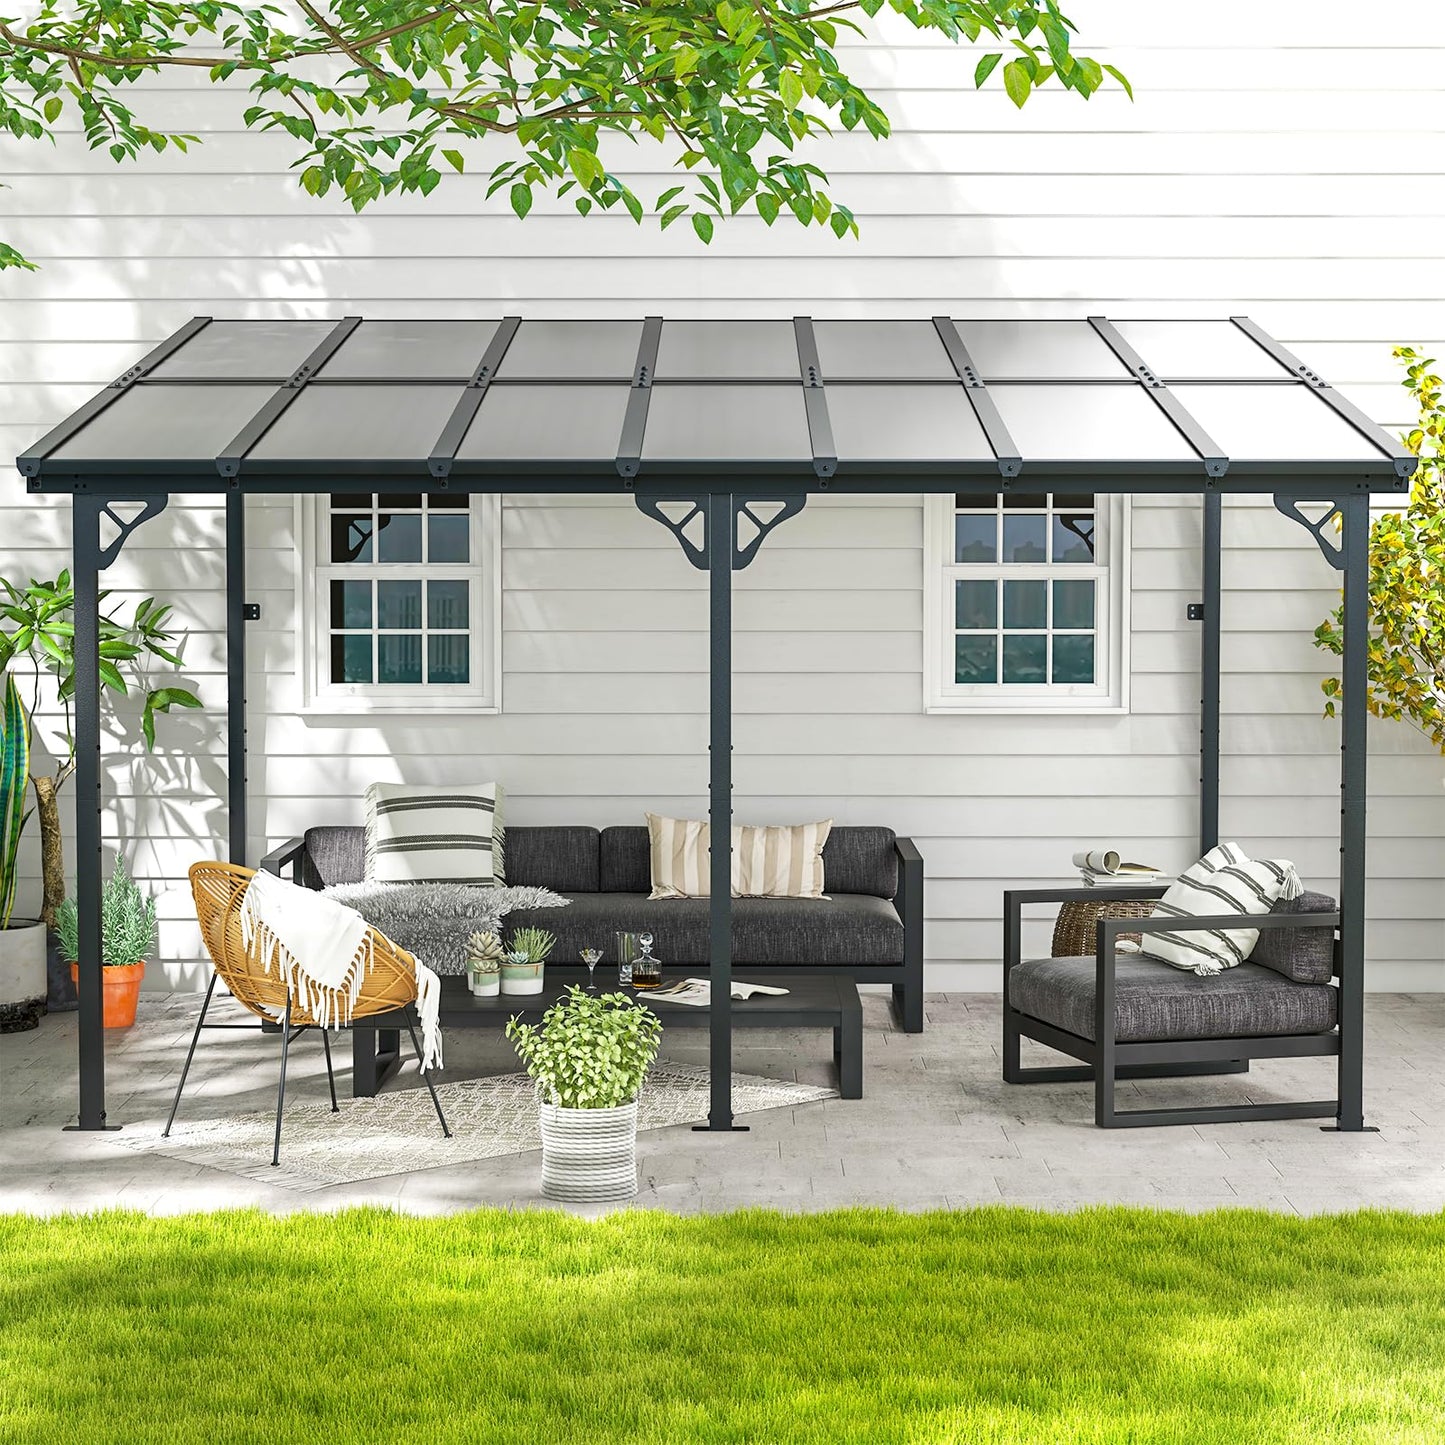 Jolydale 10' x 14' Gazebo for Patio, Gazebo Pergola with Sloped Roof, Large Wall-Mounted Heavy Duty Awnings, for Backyard, Patio, Deck and More